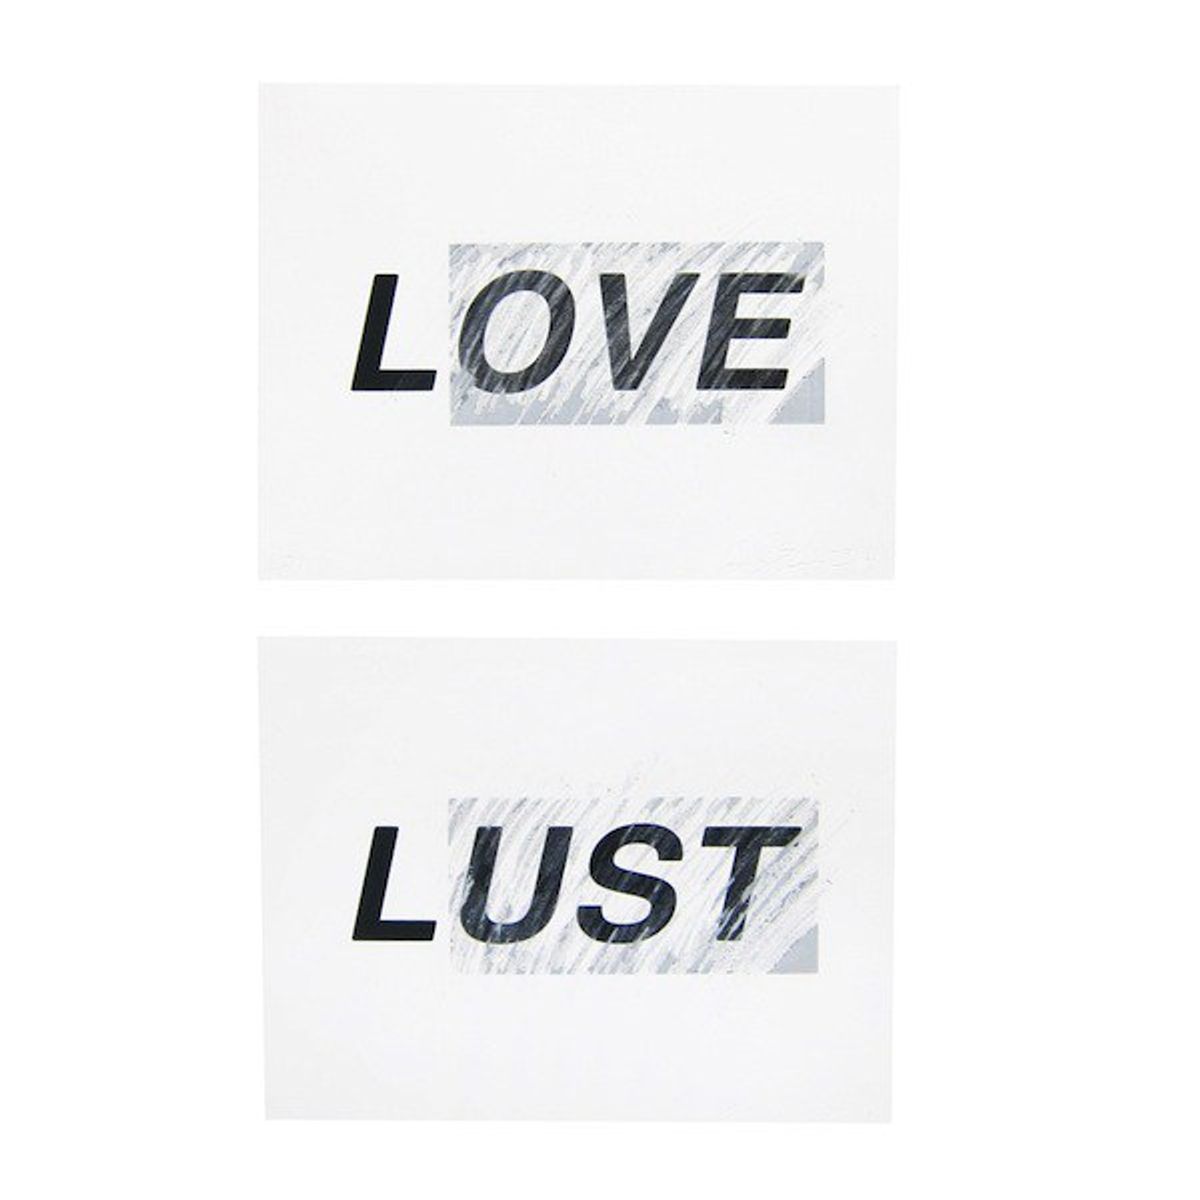 Love And Lust: A Four Letter Word Often Misused